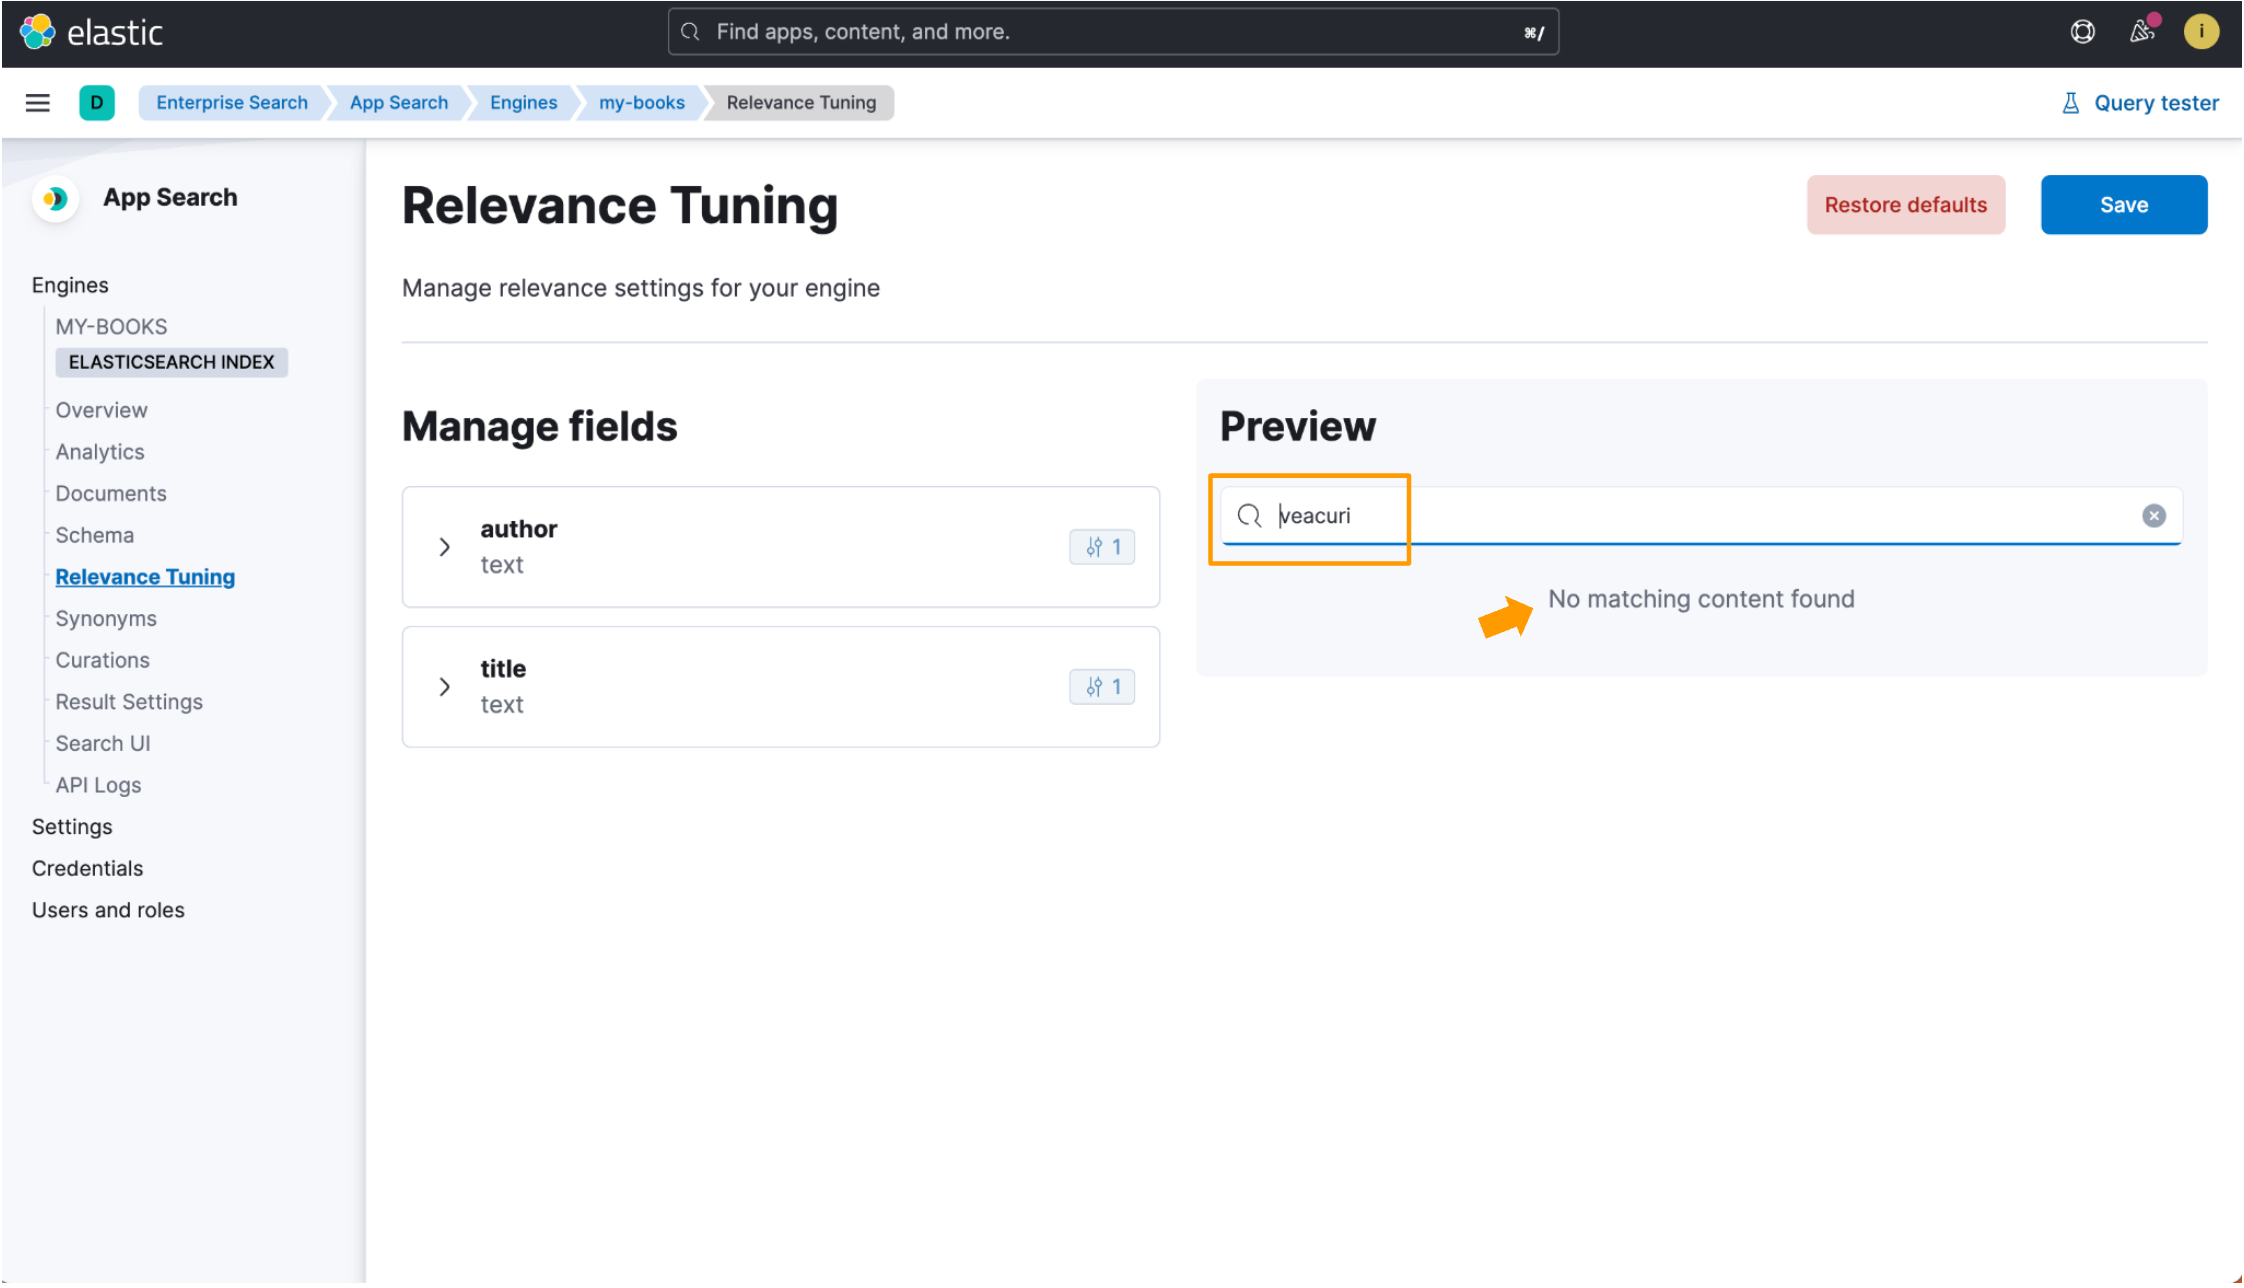 relevance tuning manage fields